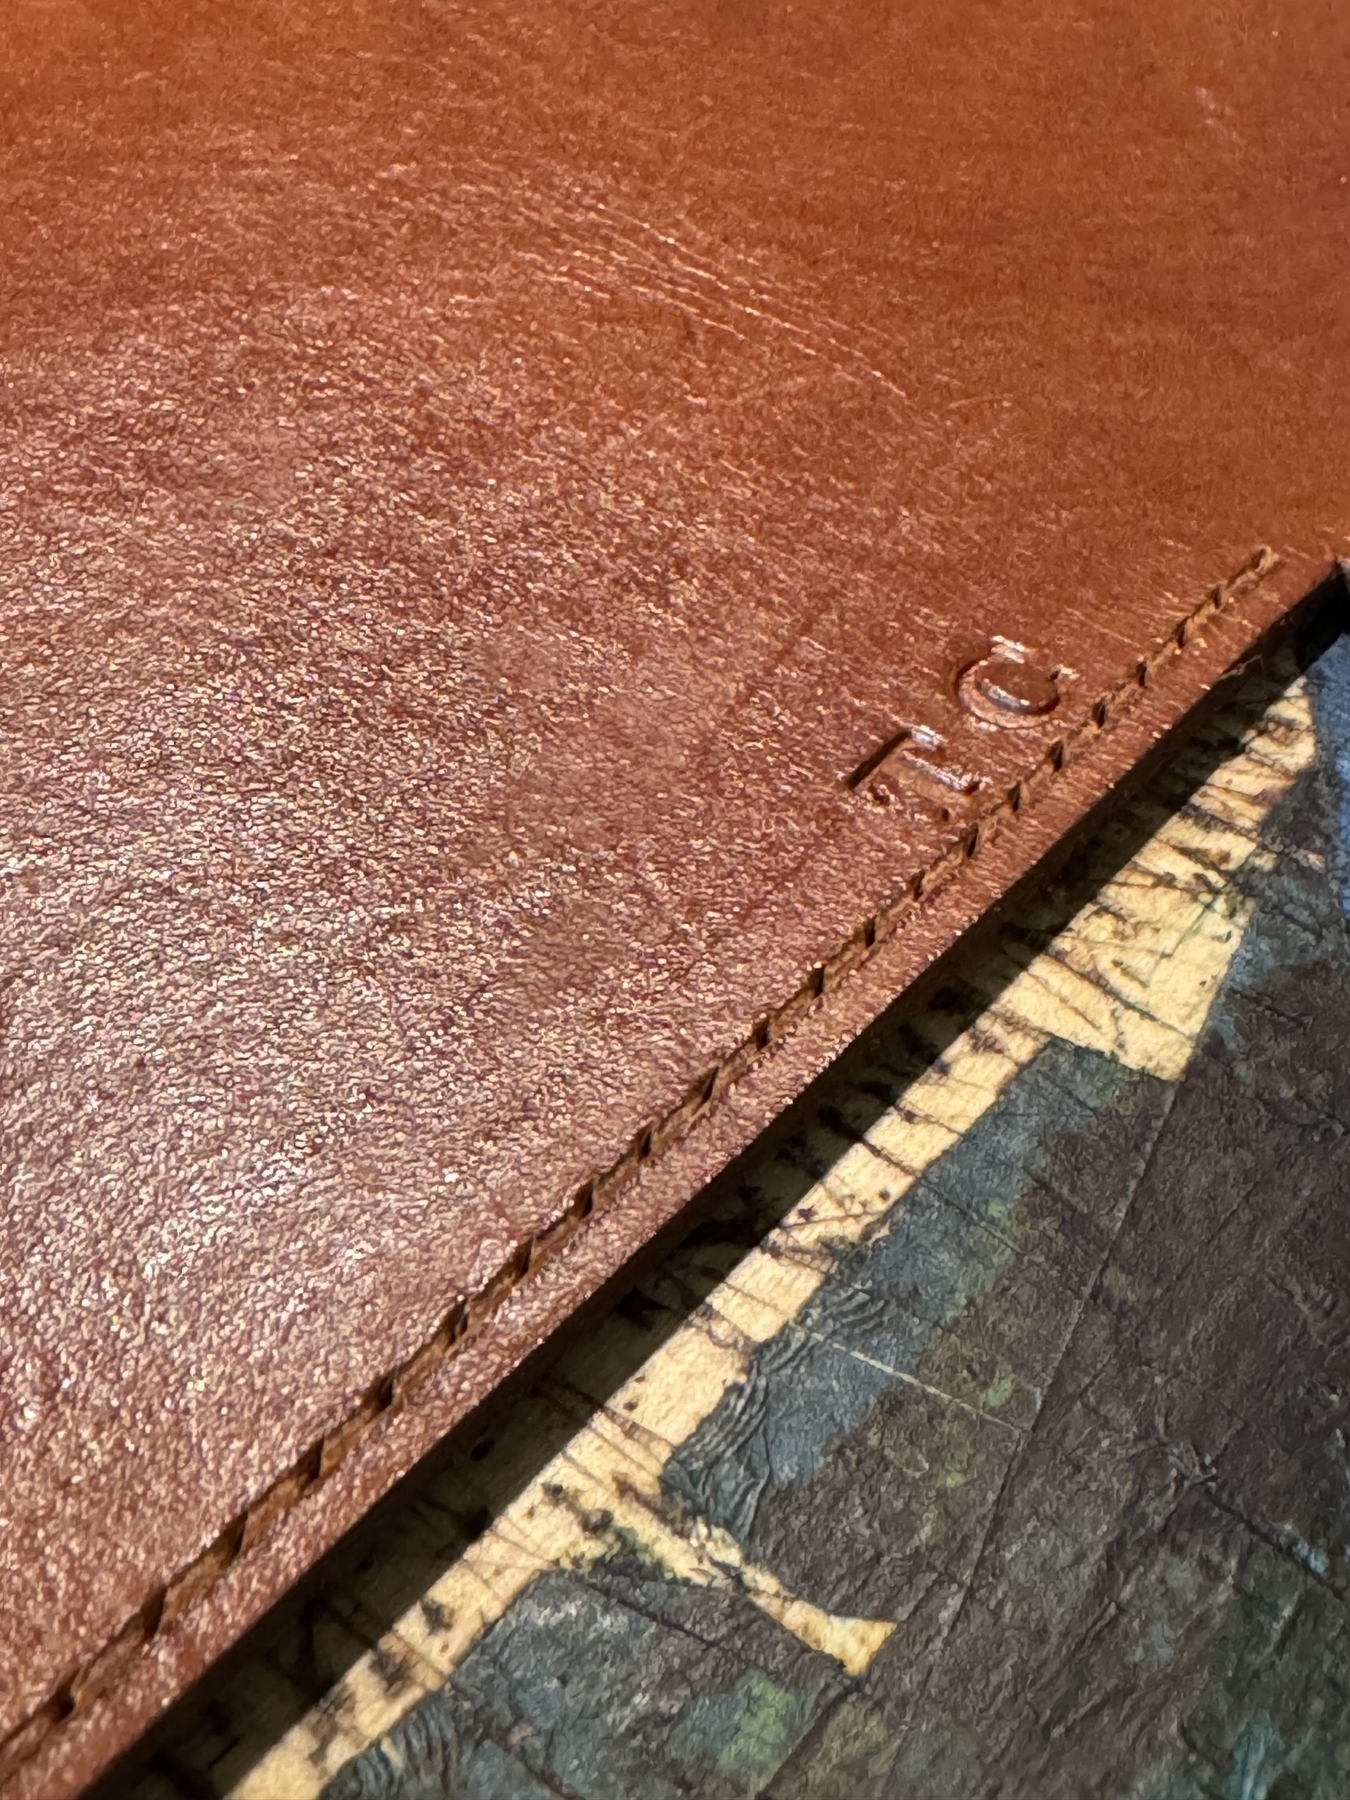 A close-up of a stitched, brown leather surface with the initials "T.C." embossed near the edge.